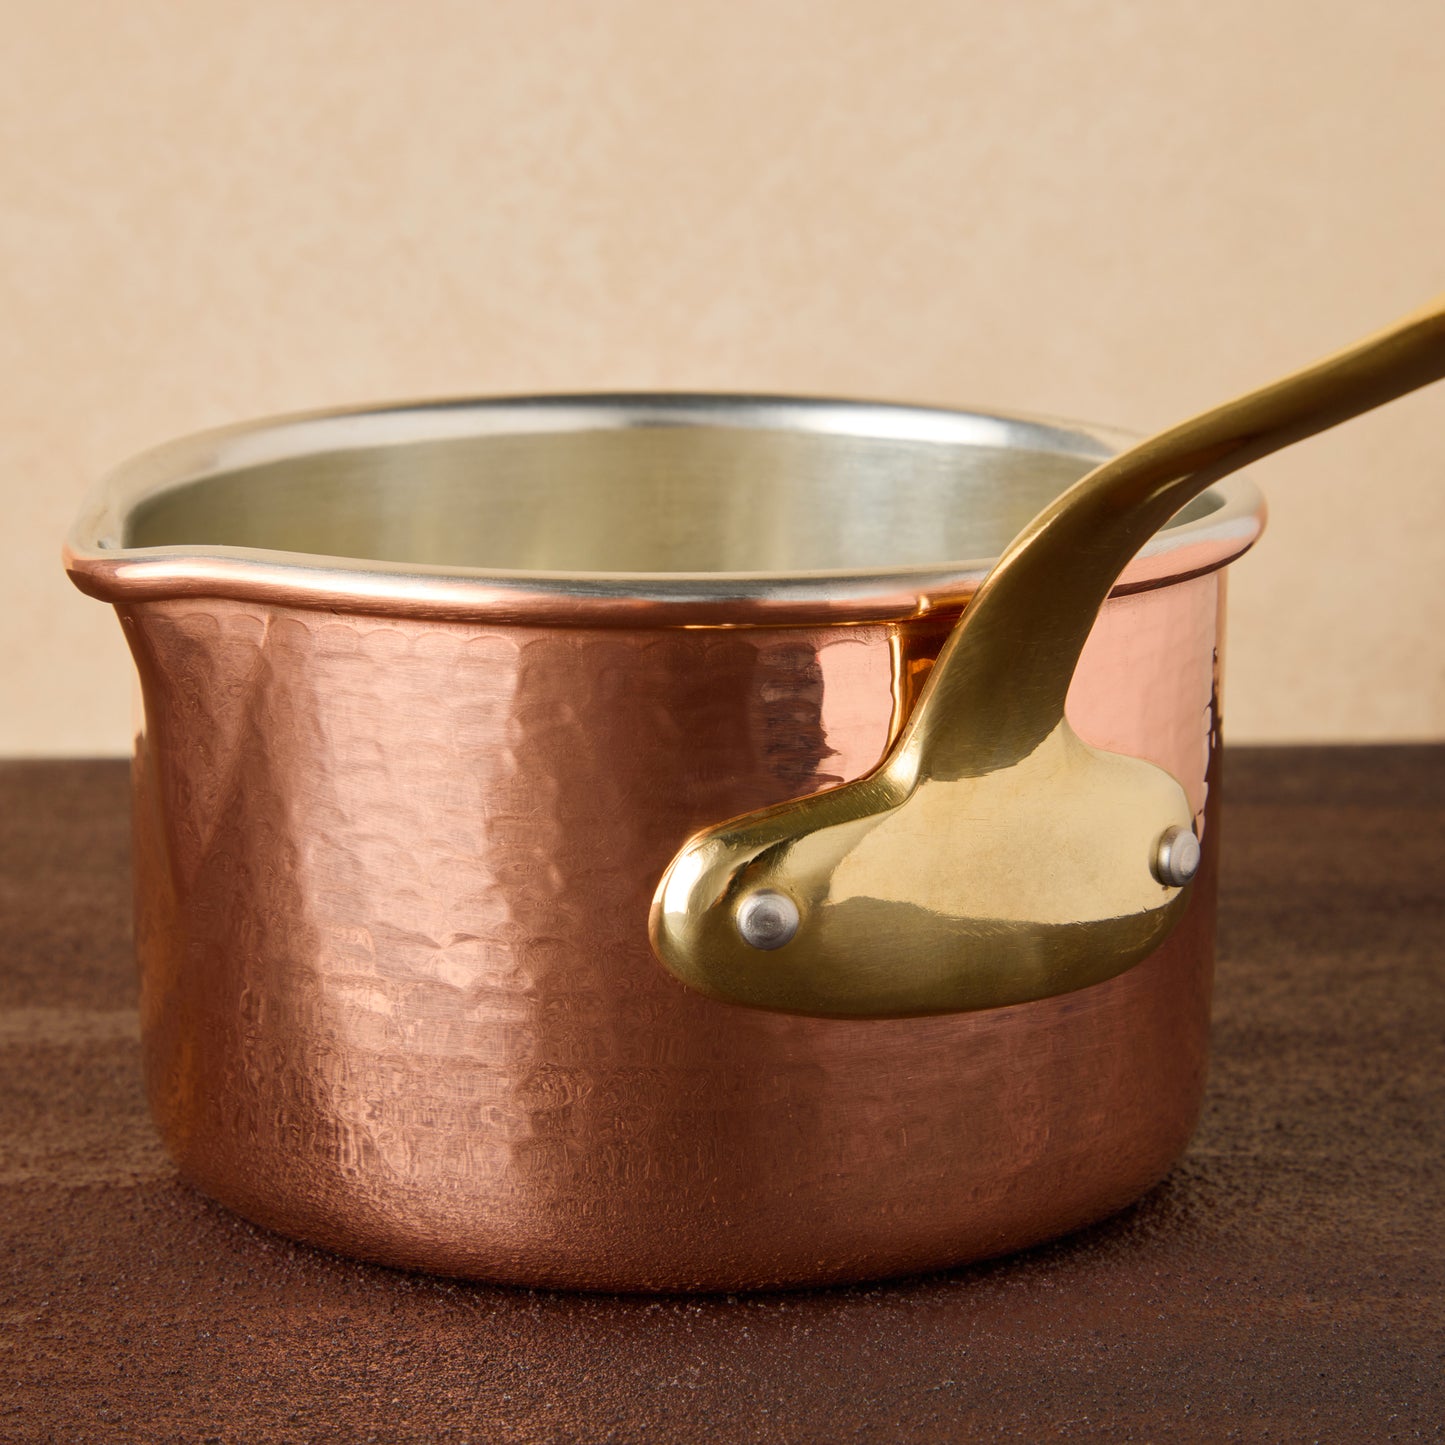 Ruffoni copper Saucepan details: the riveted handle is cast of solid bronze